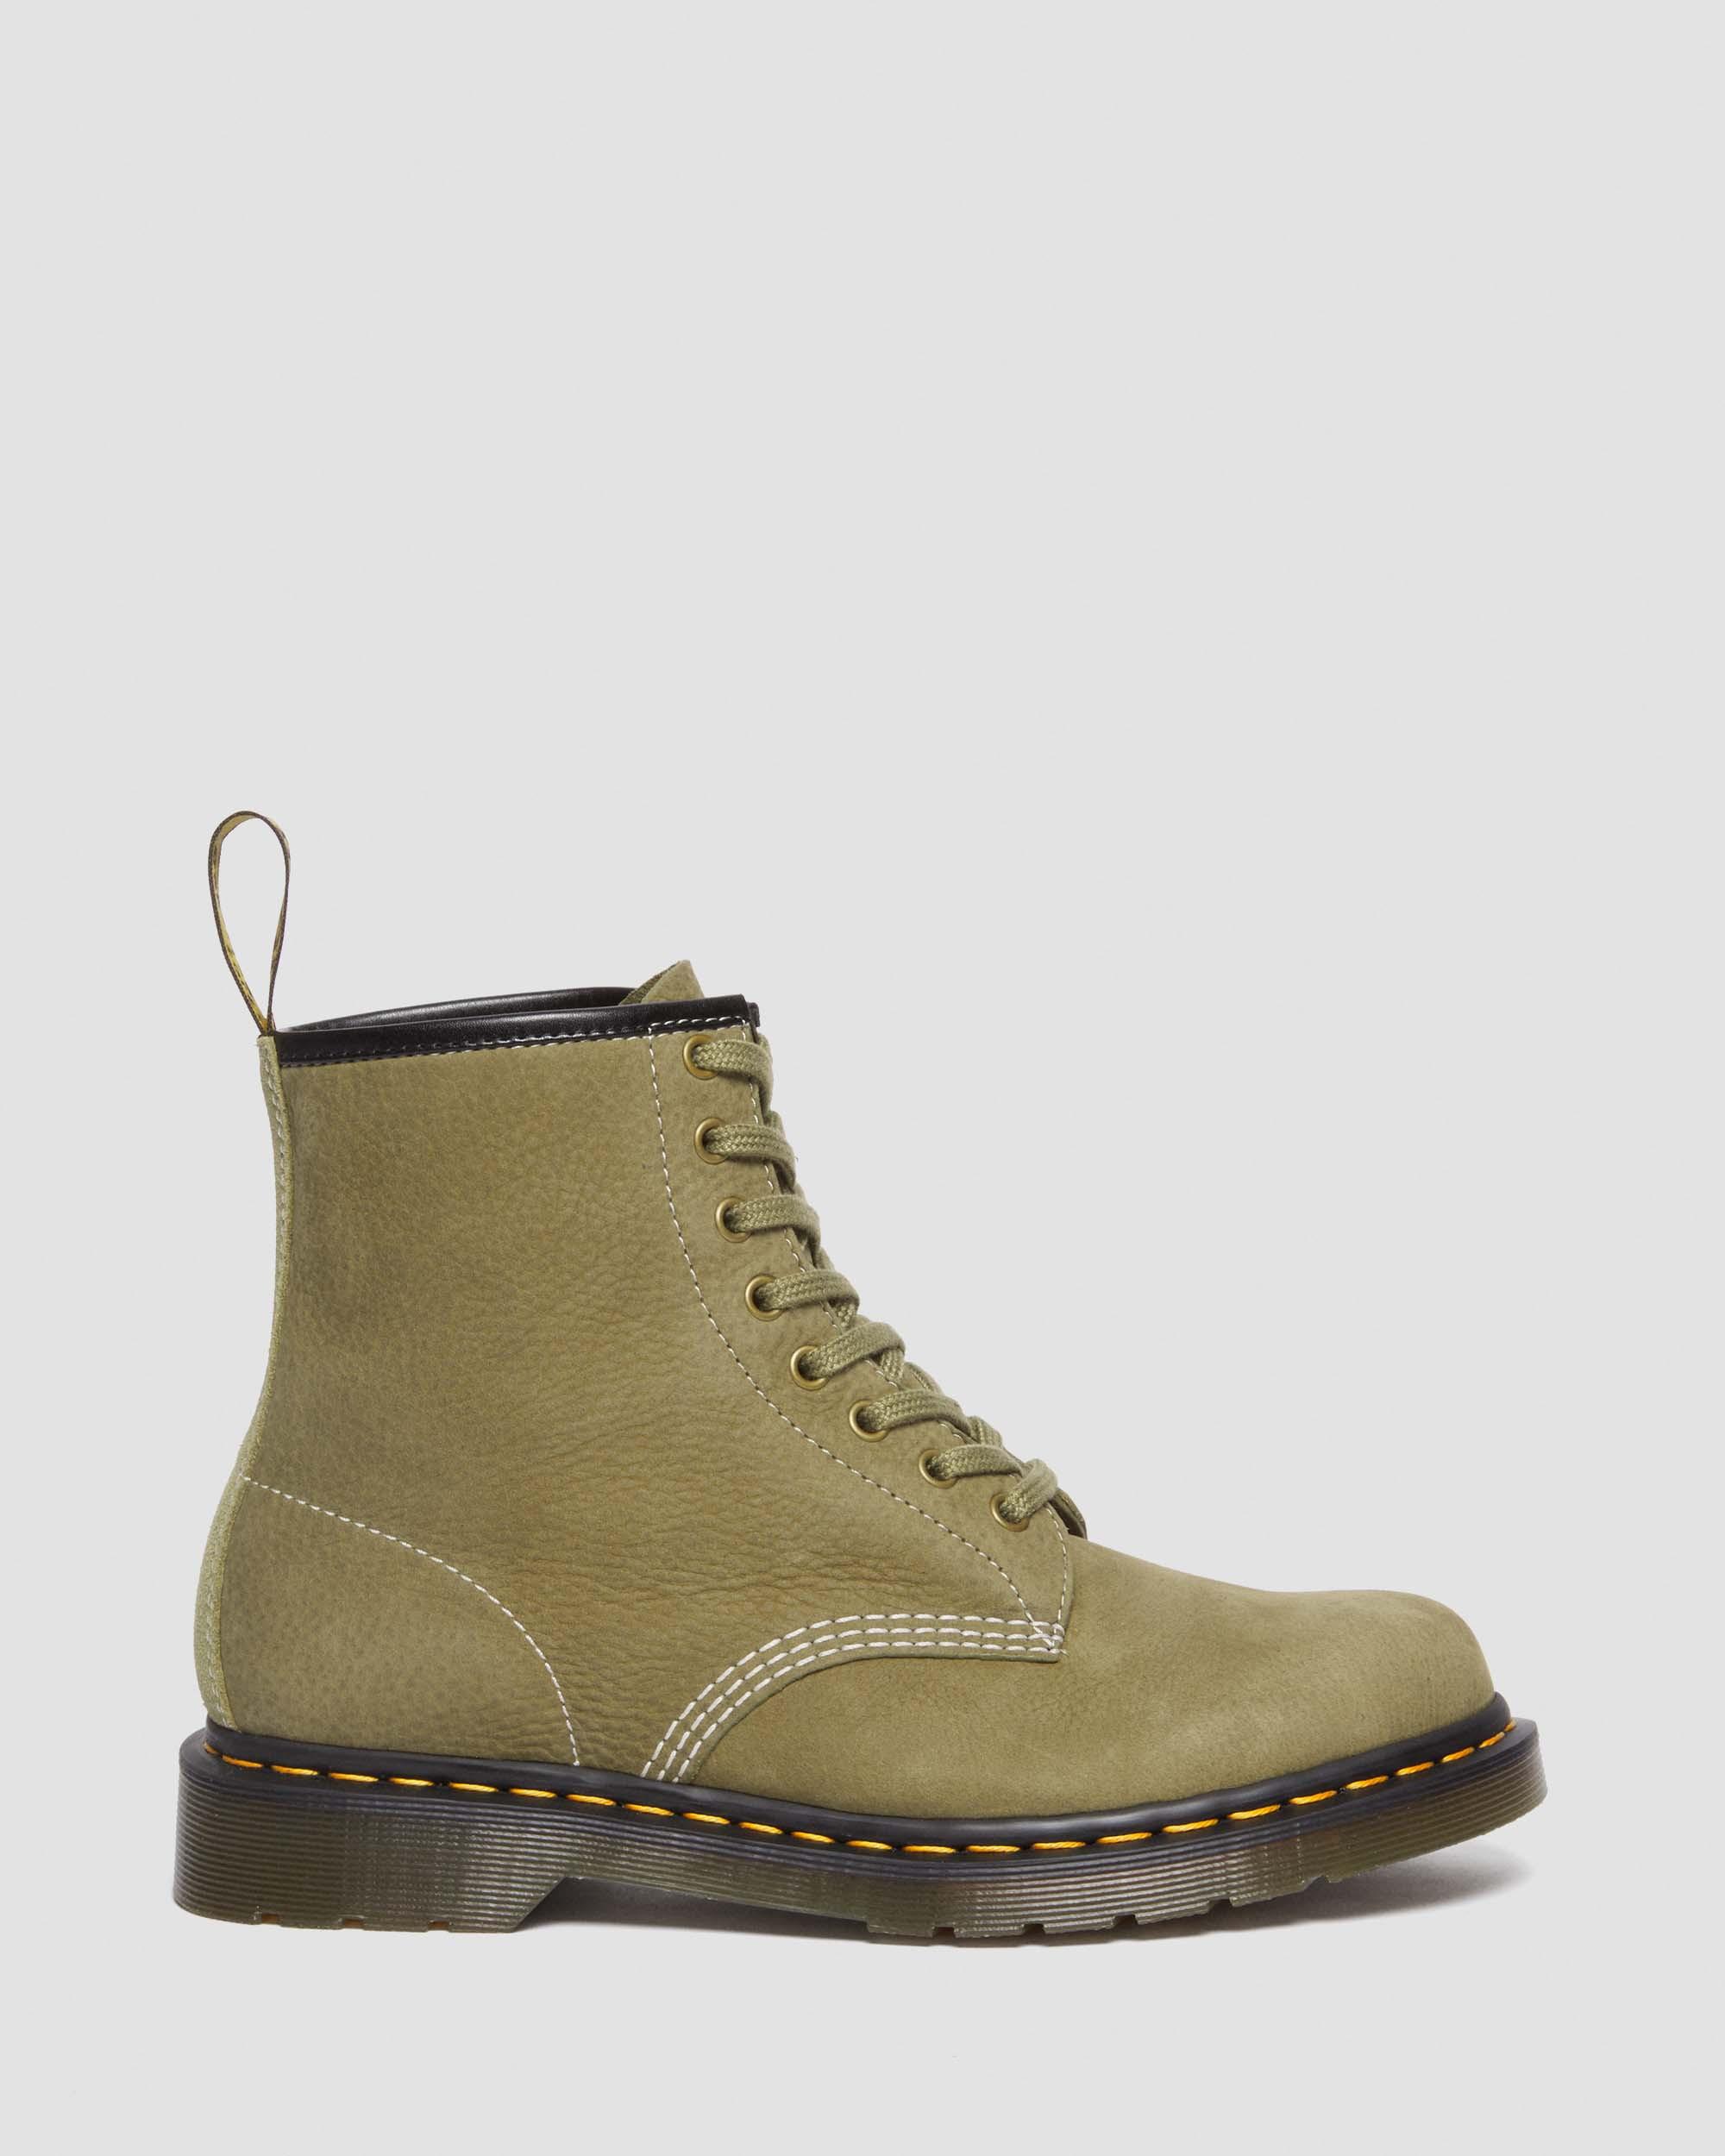 1460 Tumbled Nubuck Leather Lace Up Boots in Muted Olive | Dr. Martens